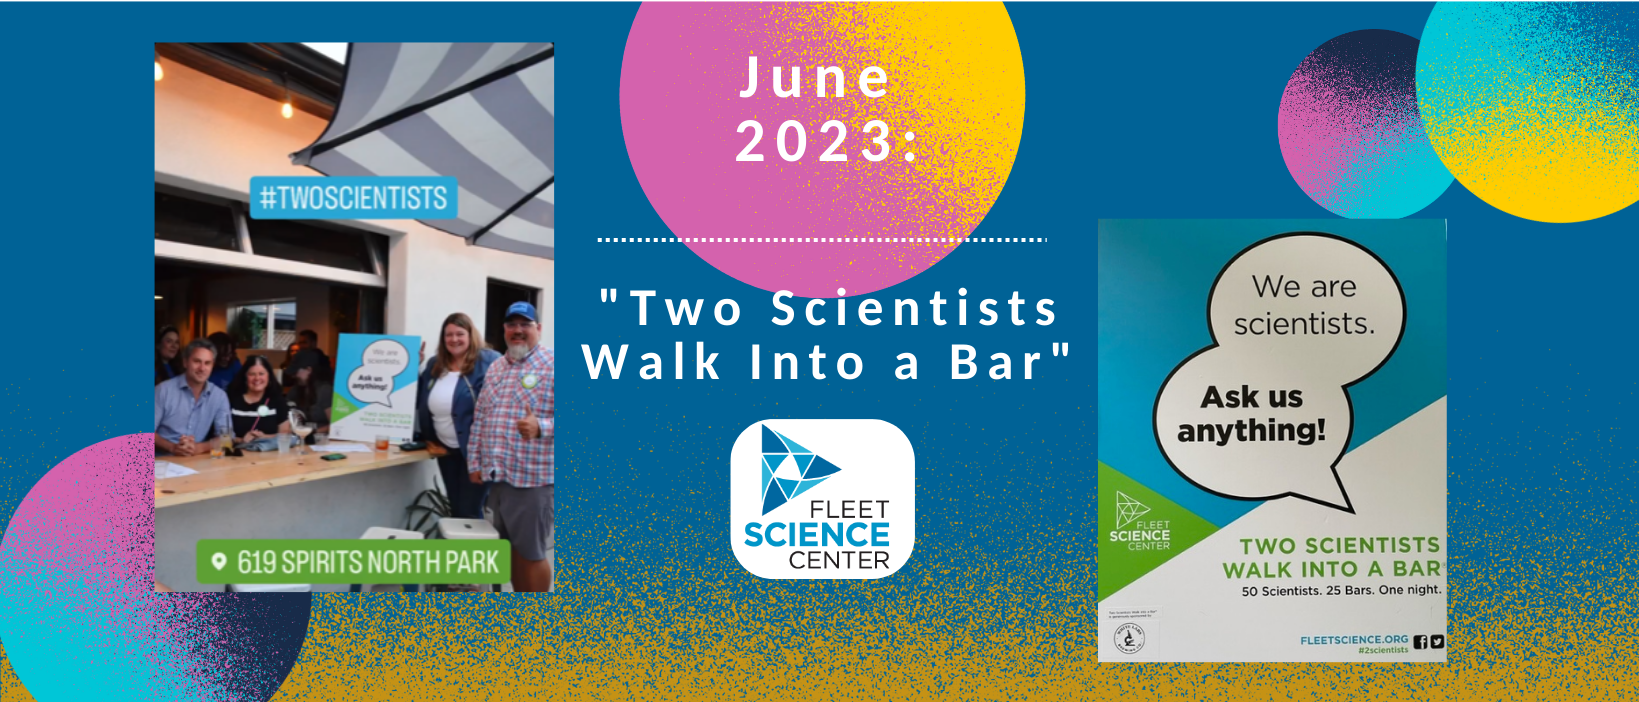 2 of 5, June 2023- Two Scientists Walk Into a Bar Event. One picture shows Taylor Berninger with other scientists around their sign at 619 Spirits in North Park, waiting to talk to patrons. Another picture is a close up of the sign depicting quote bubbles stating "We are Scientists- Ask us Anything!" with the Fleet Science Center logo and promoting the hashtag #2Scientists.